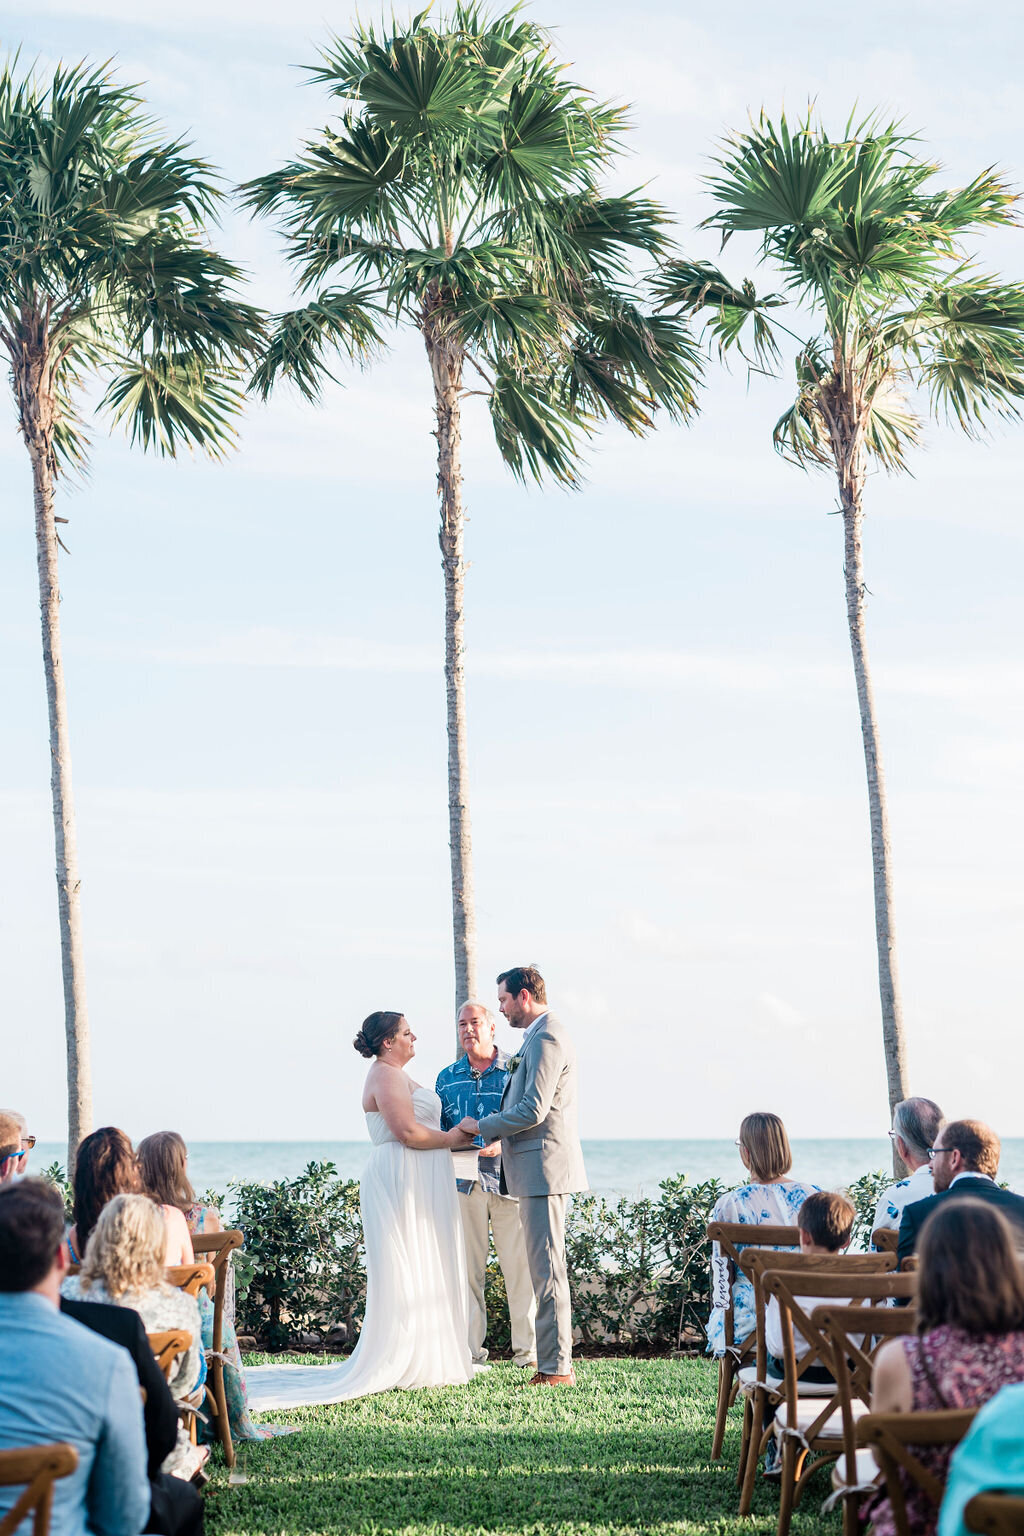 A bride and groom say their vows at their Key West wedding